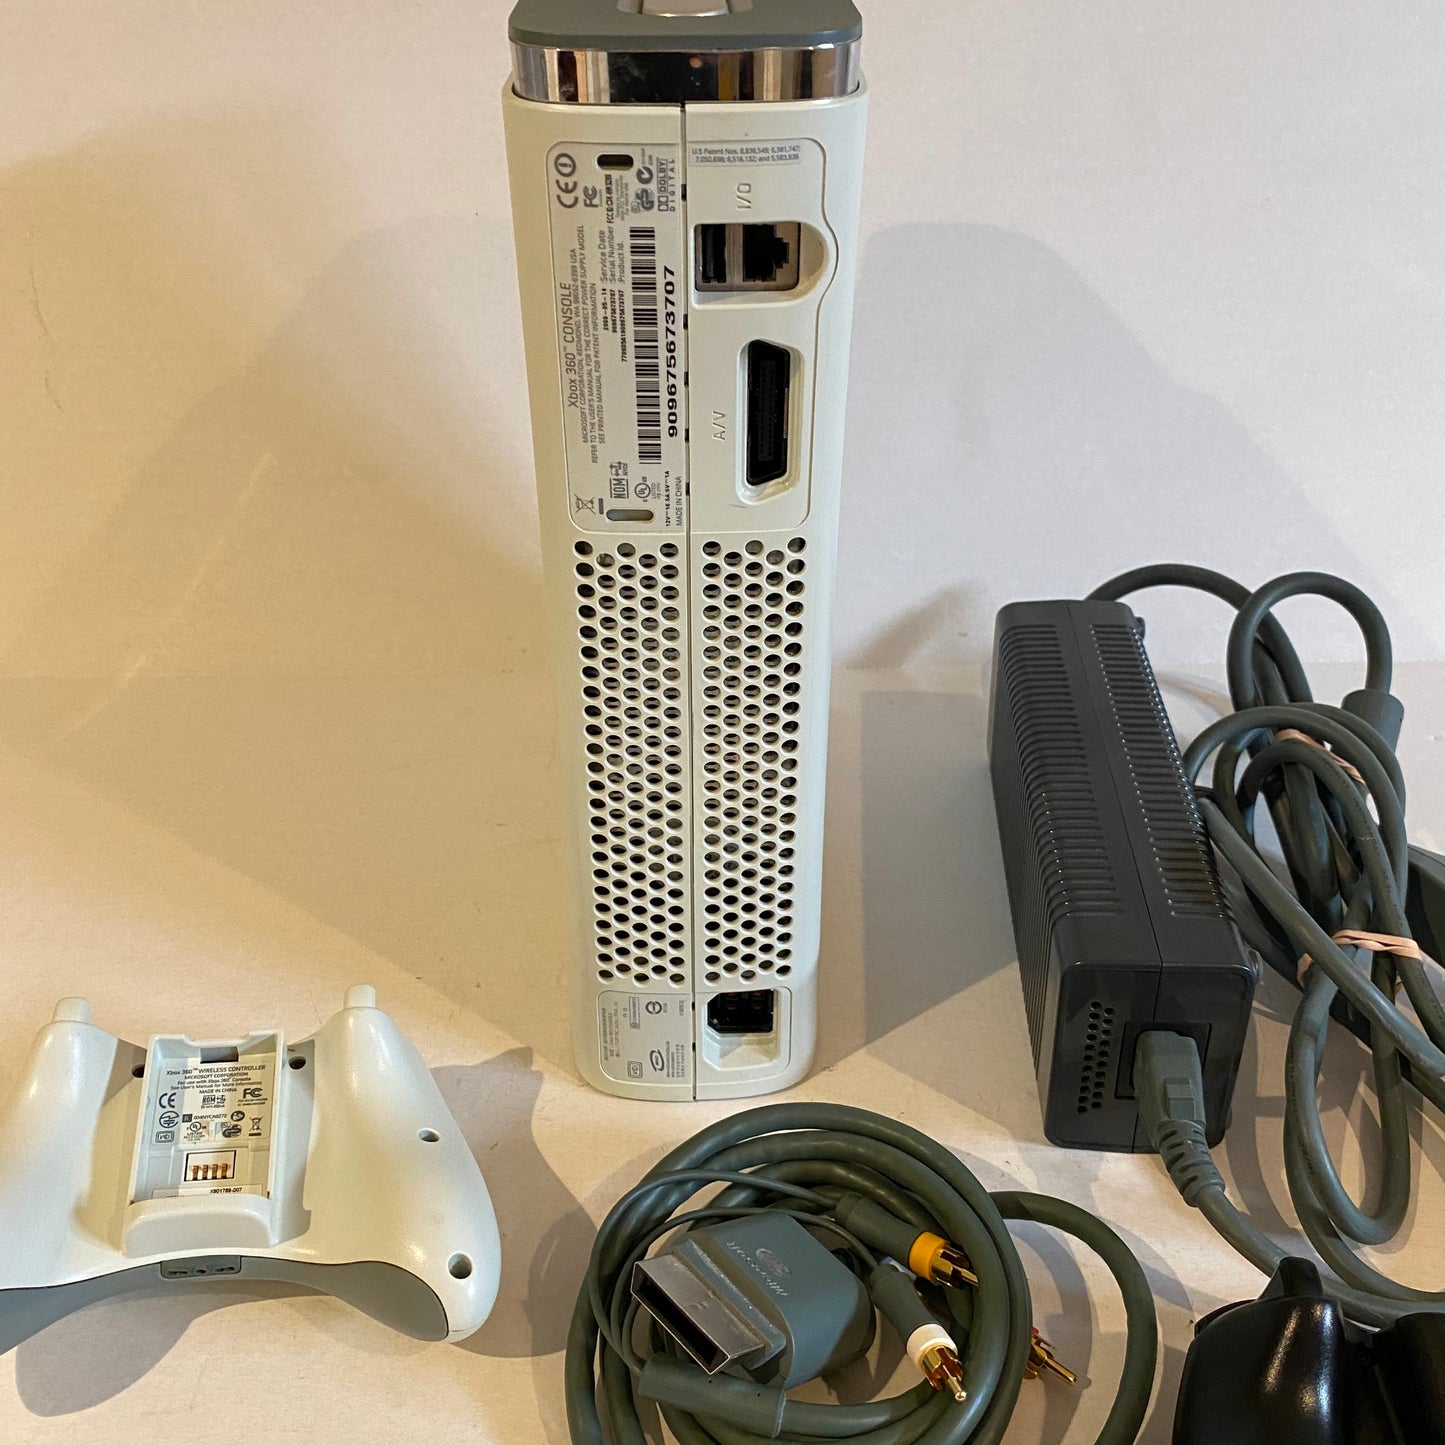 White Xbox 360 20GB Console with Cables and 3 Controllers